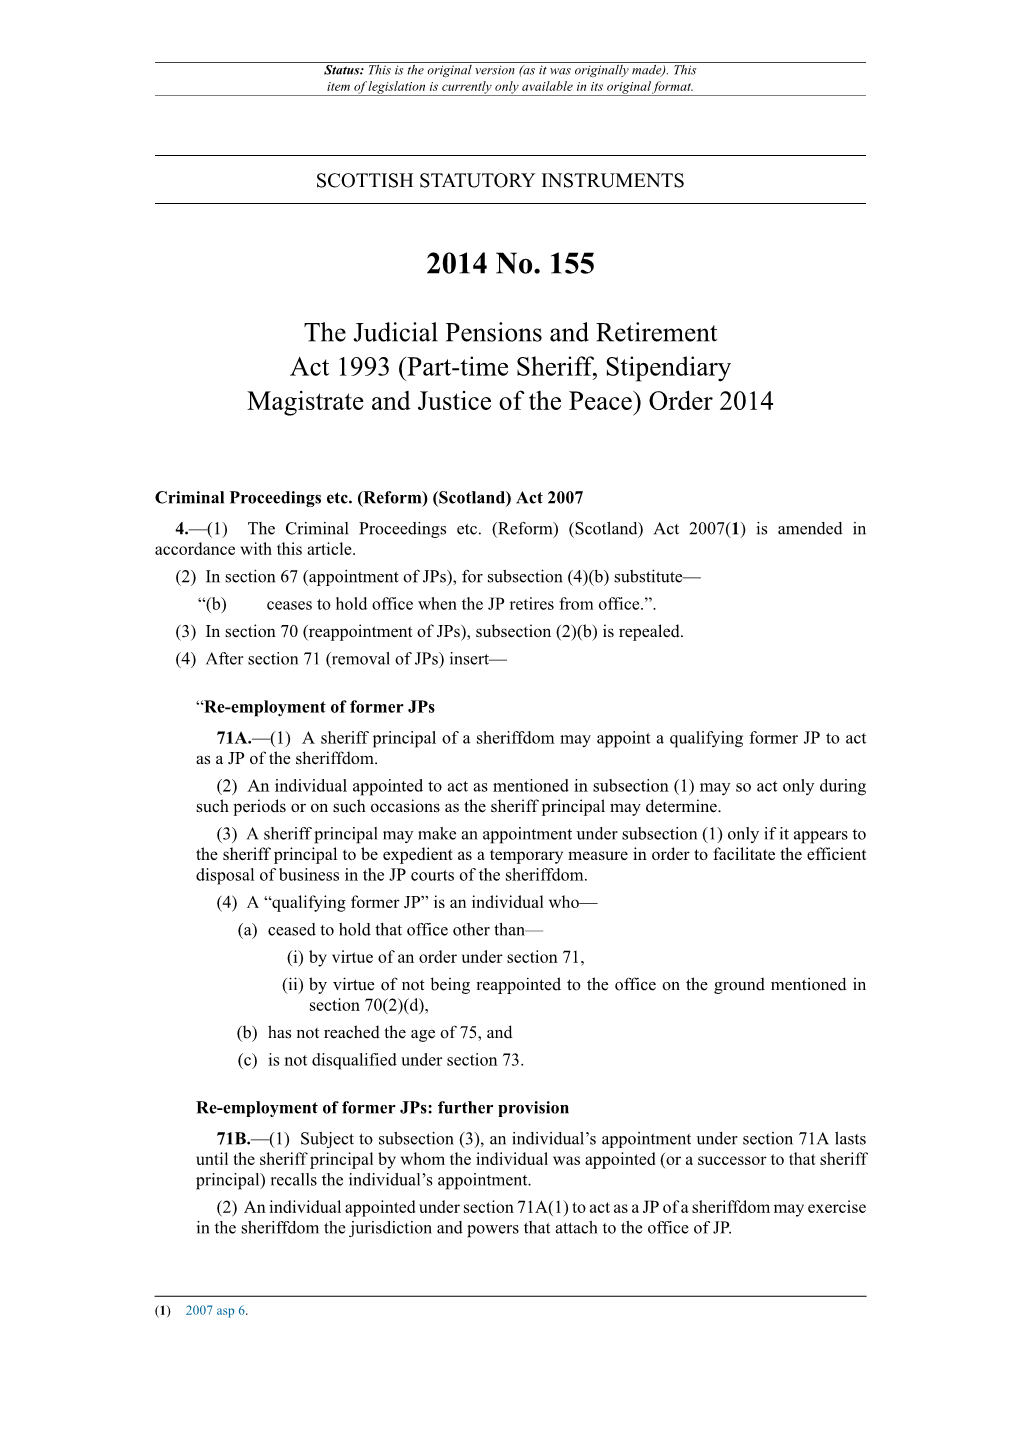 The Judicial Pensions and Retirement Act 1993 (Part-Time Sheriff, Stipendiary Magistrate and Justice of the Peace) Order 2014